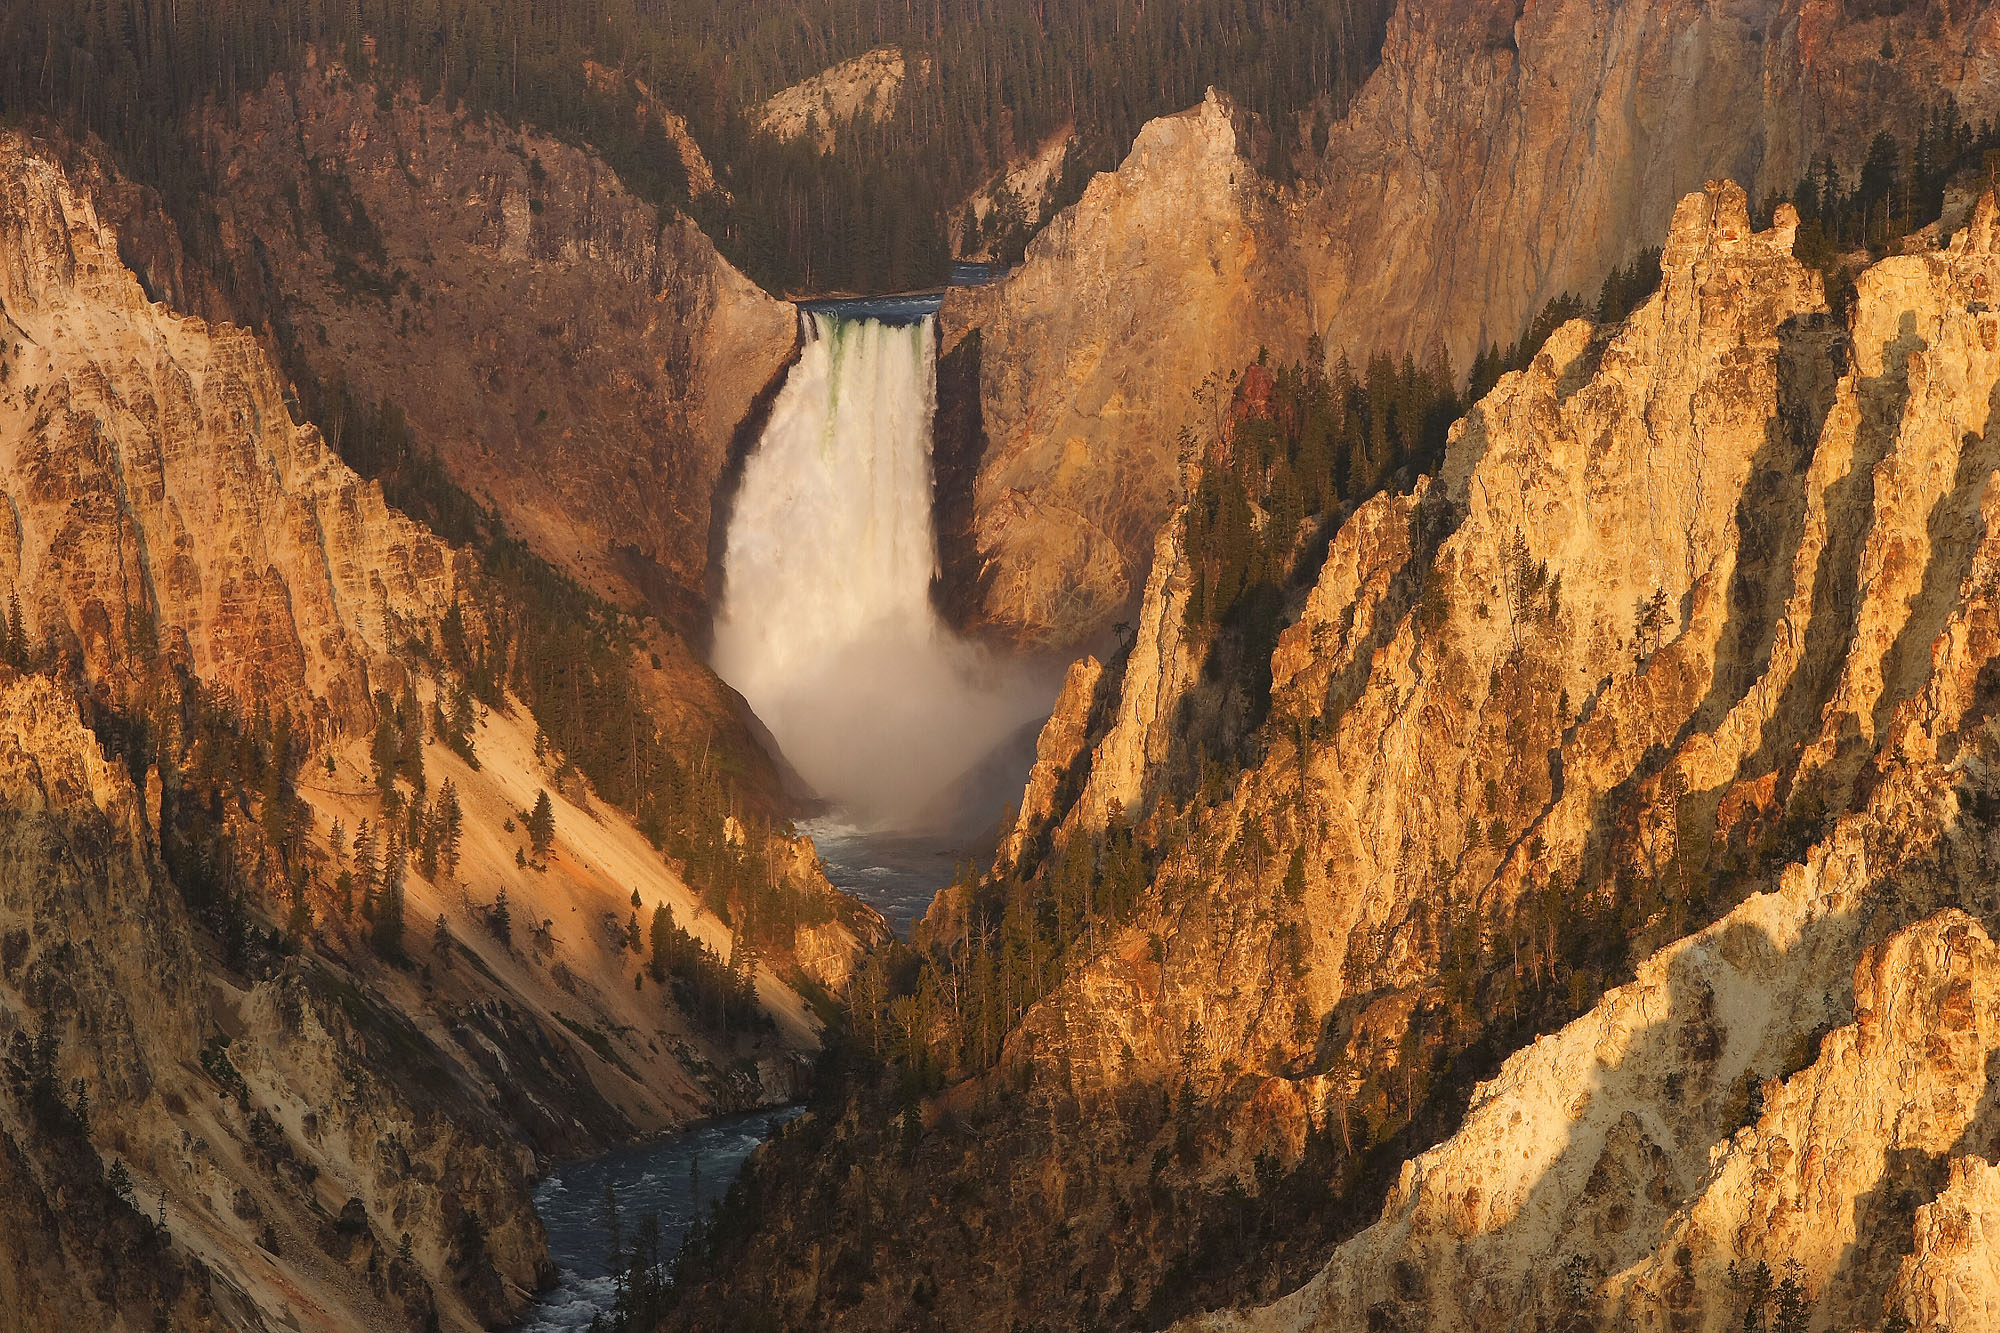 The Grand Canyon of the Yellowstone at Artist Point with Lower Falls and the pastel-colored canyon walls